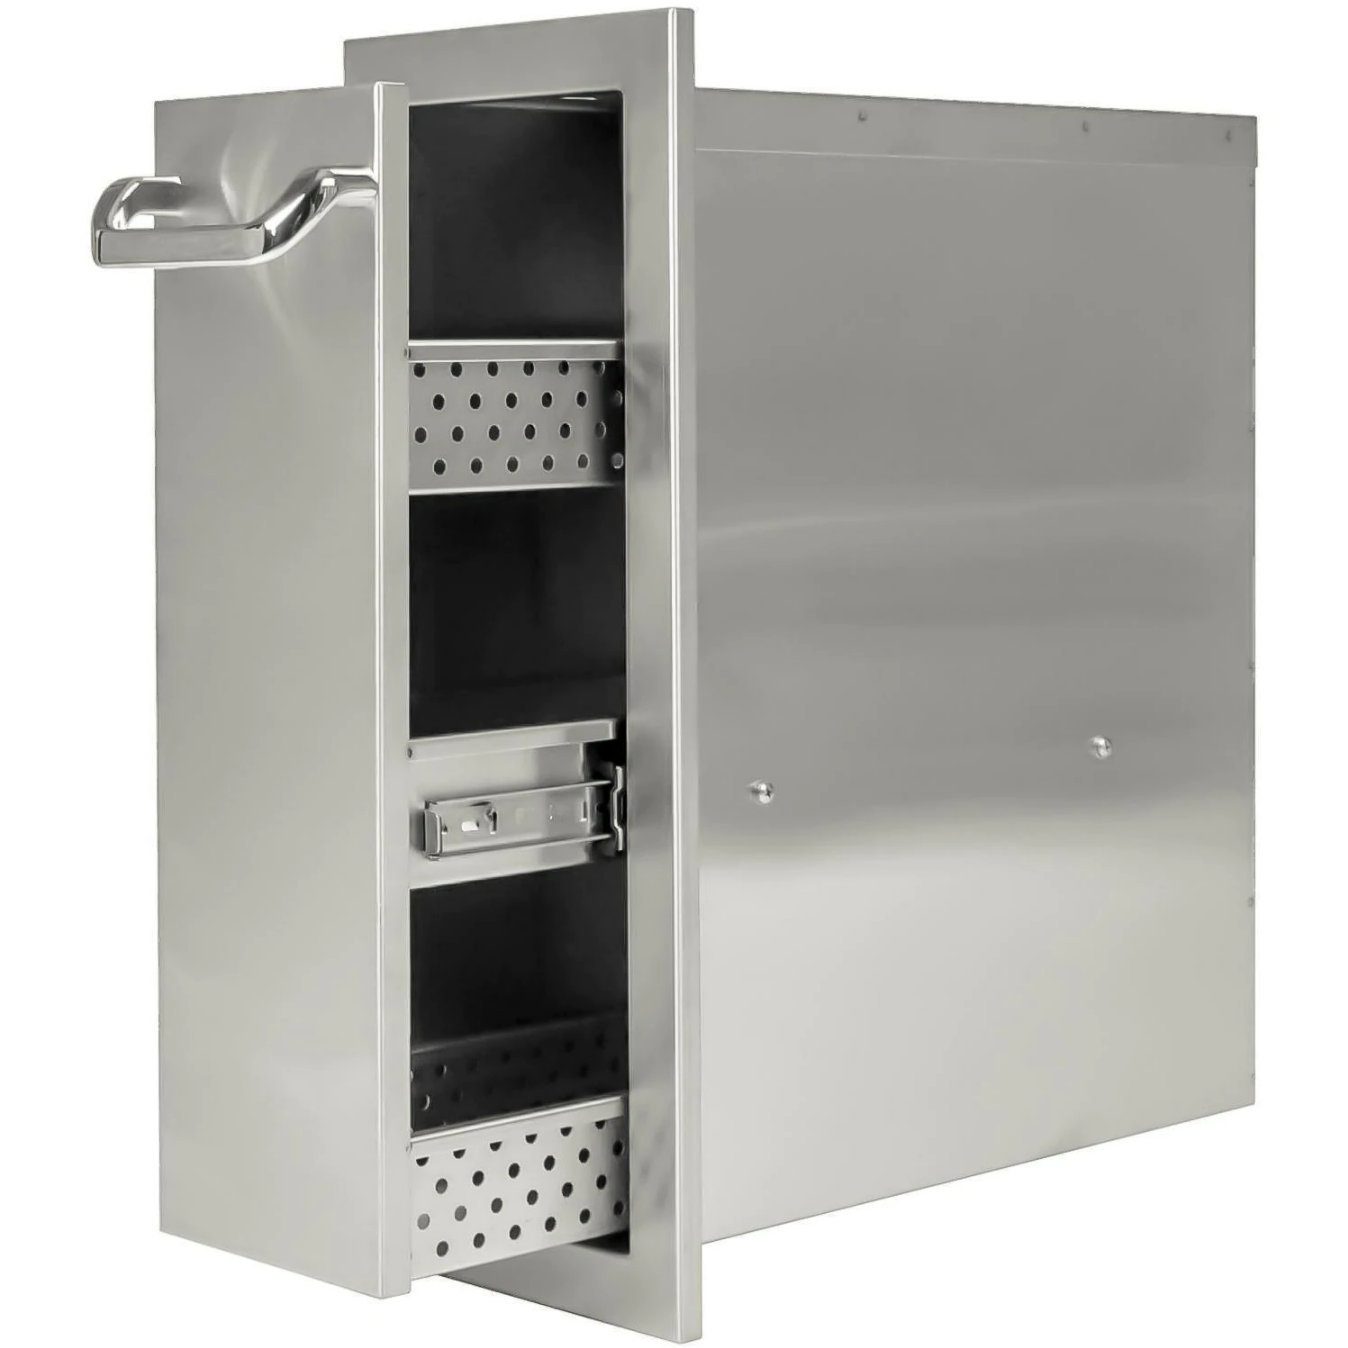 PCM 260 Series 8" Stainless Steel Spice Rack